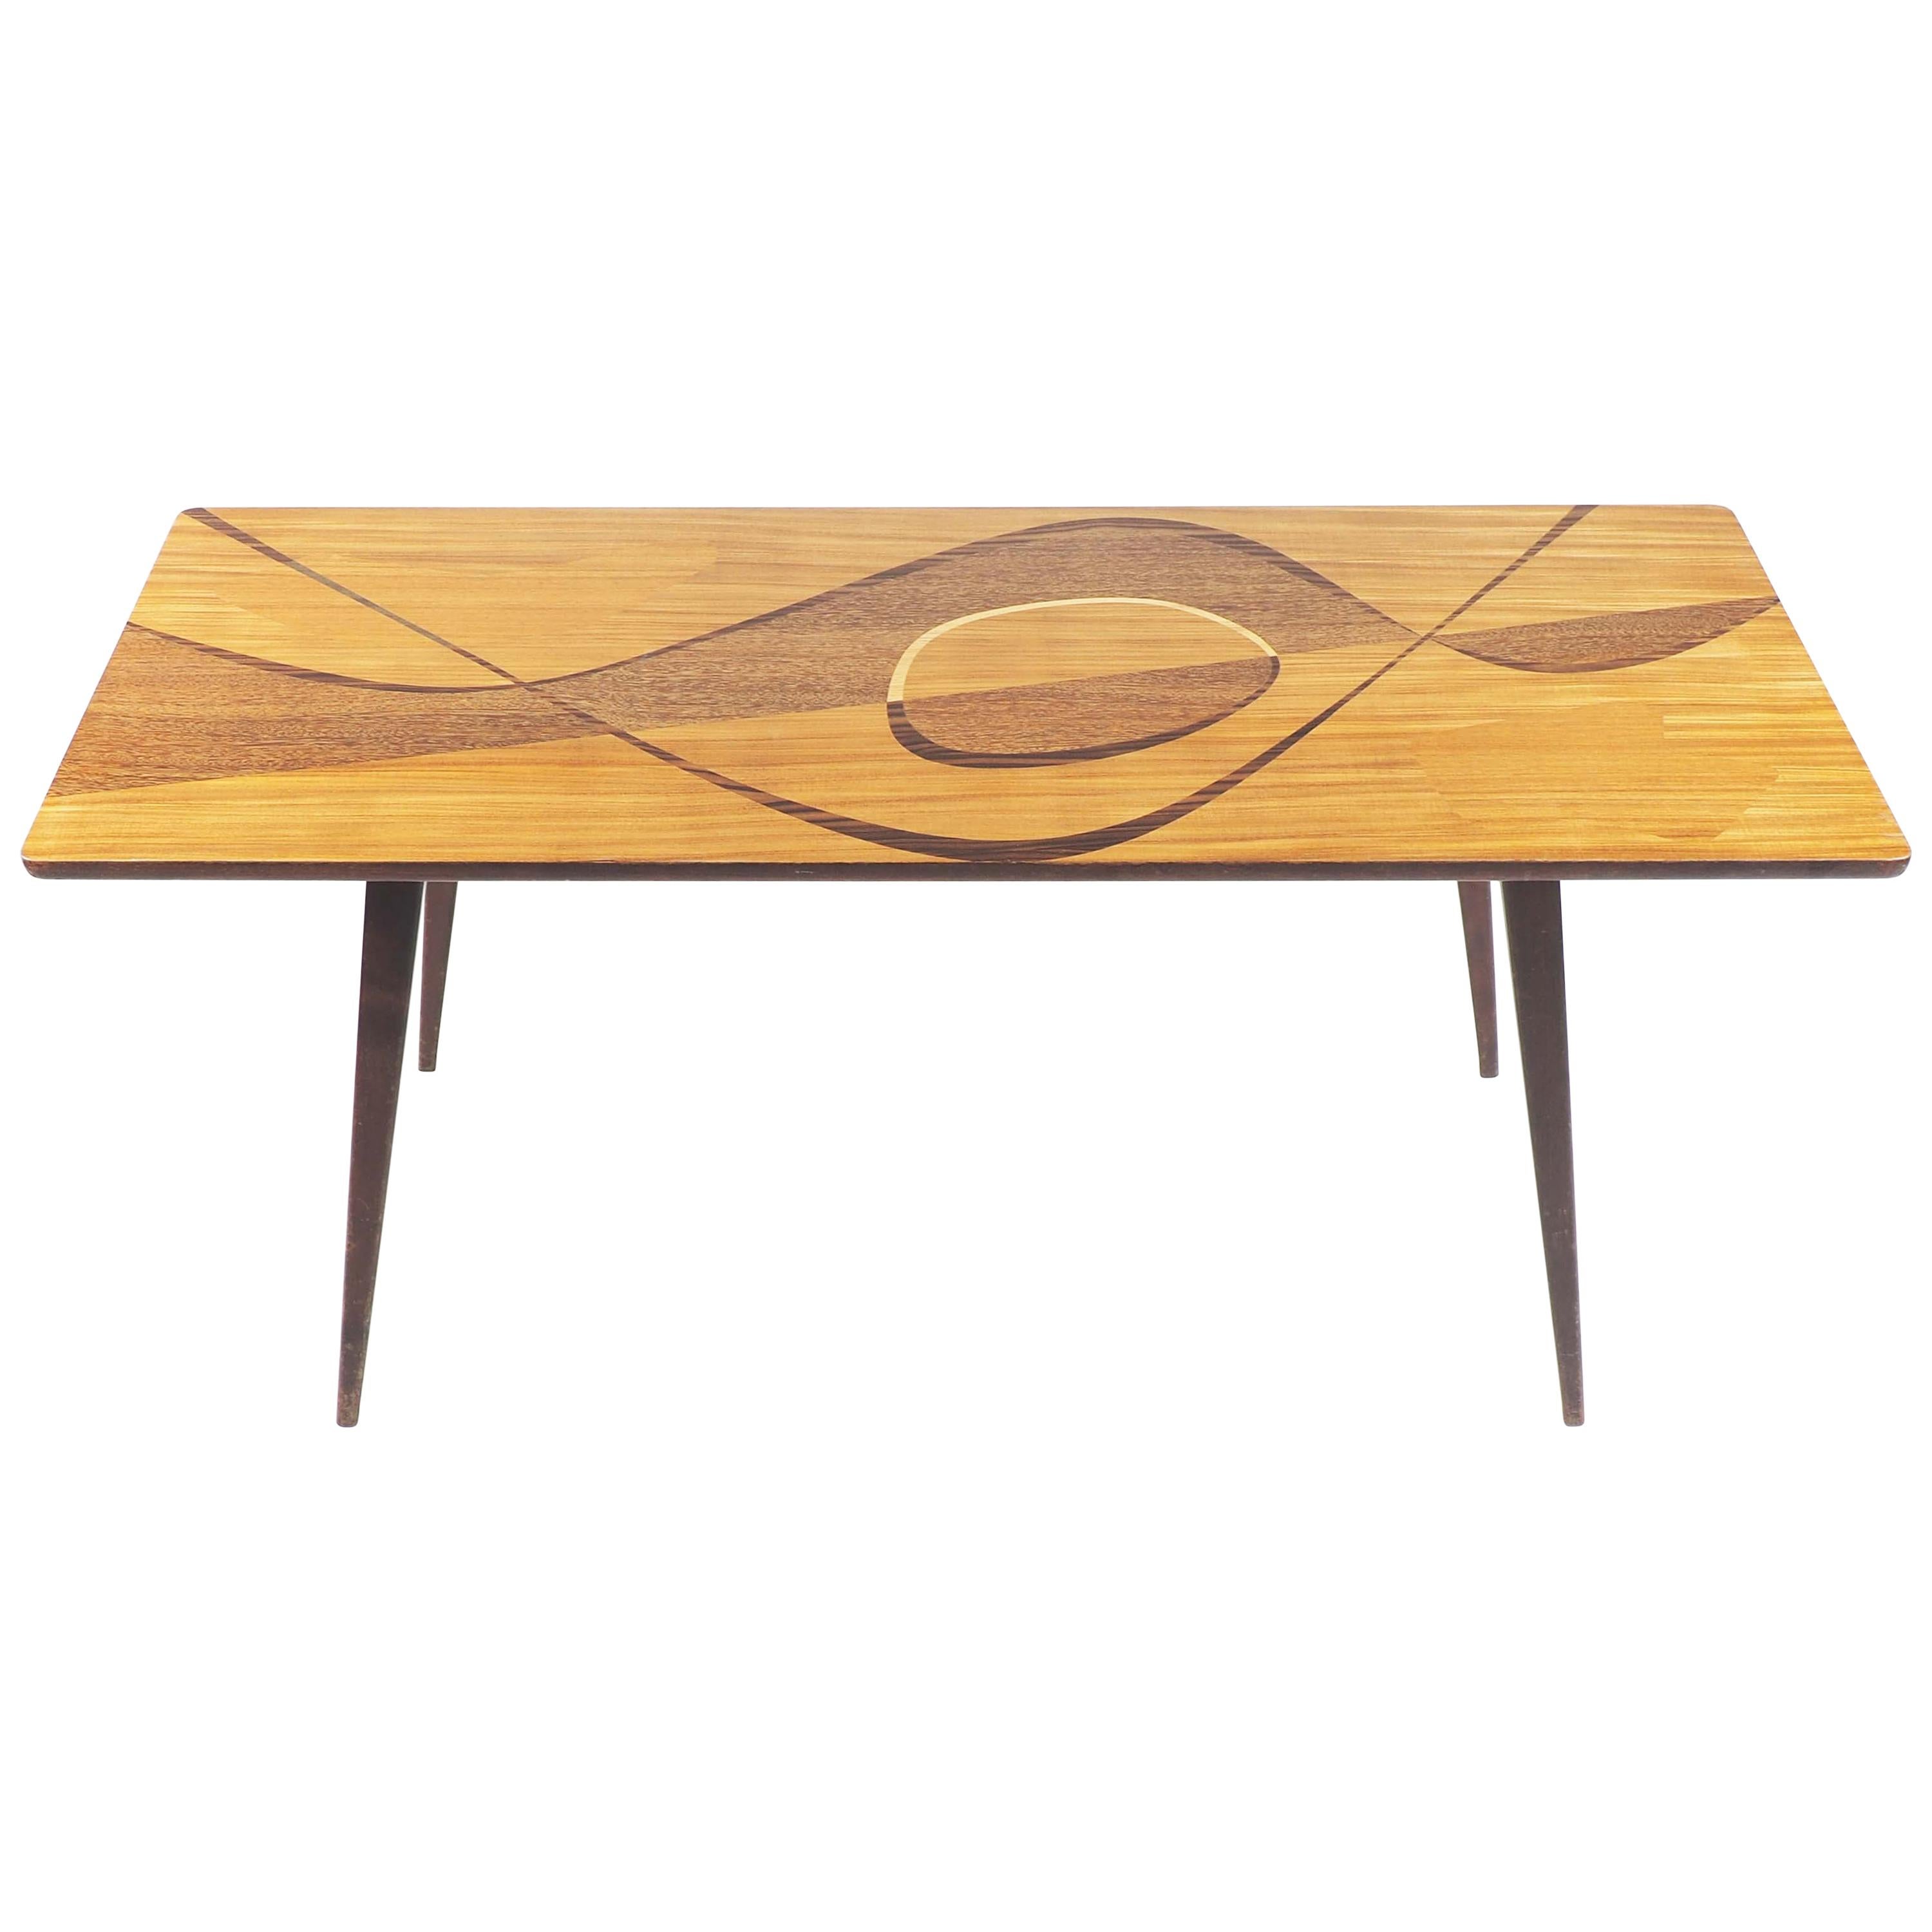 Coffee Table with Inlaid Wood from Sweden, 1950s For Sale